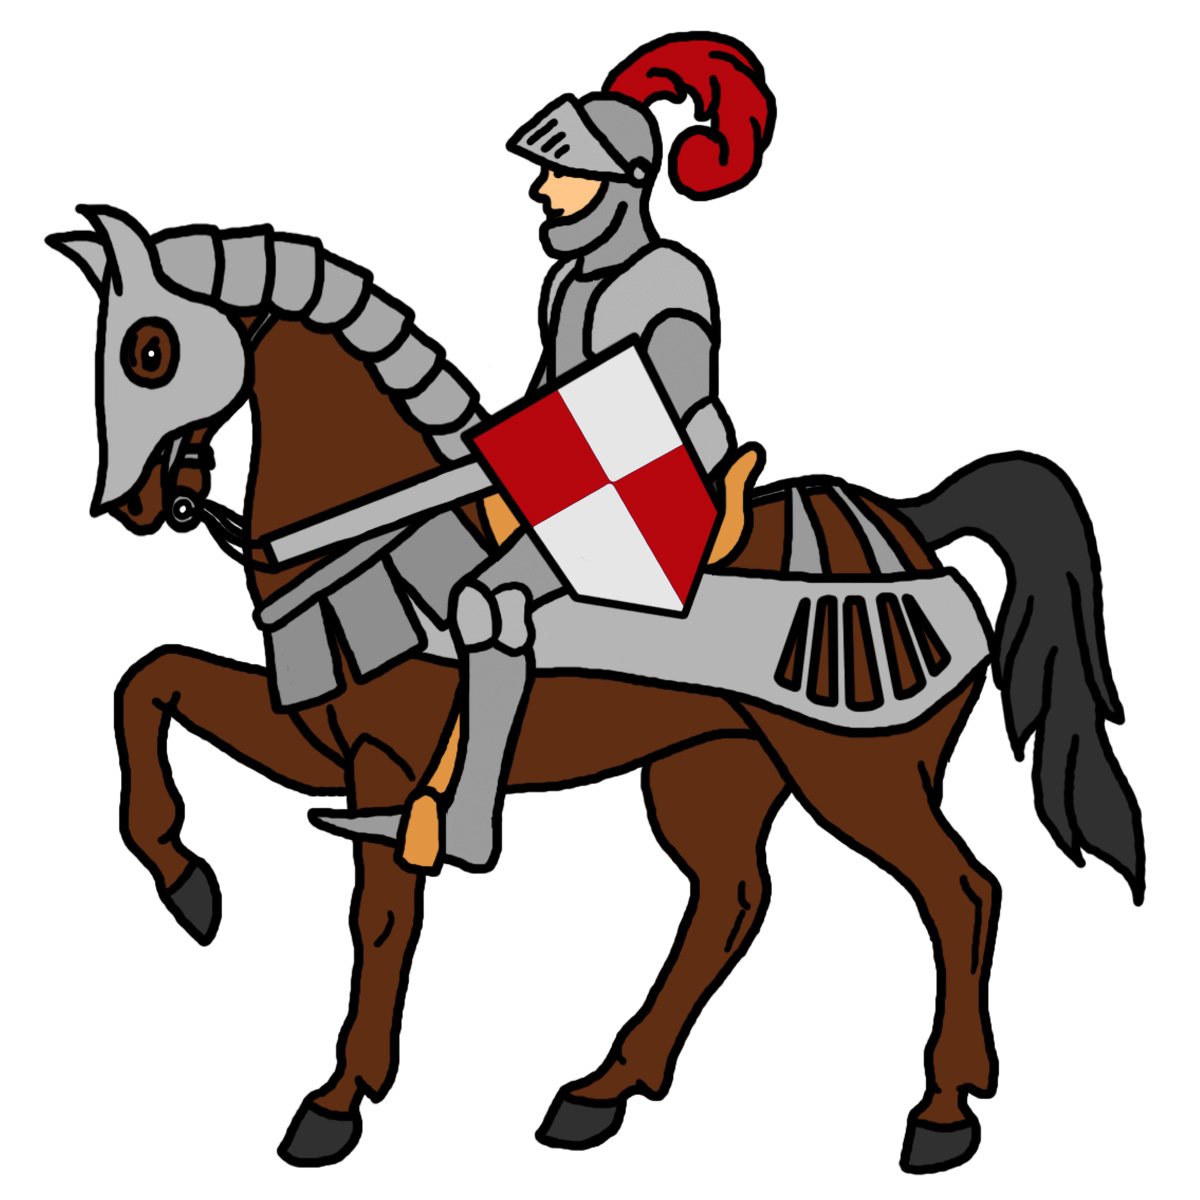 Free Knight in Shining Armor Clip Art - The Cliparts